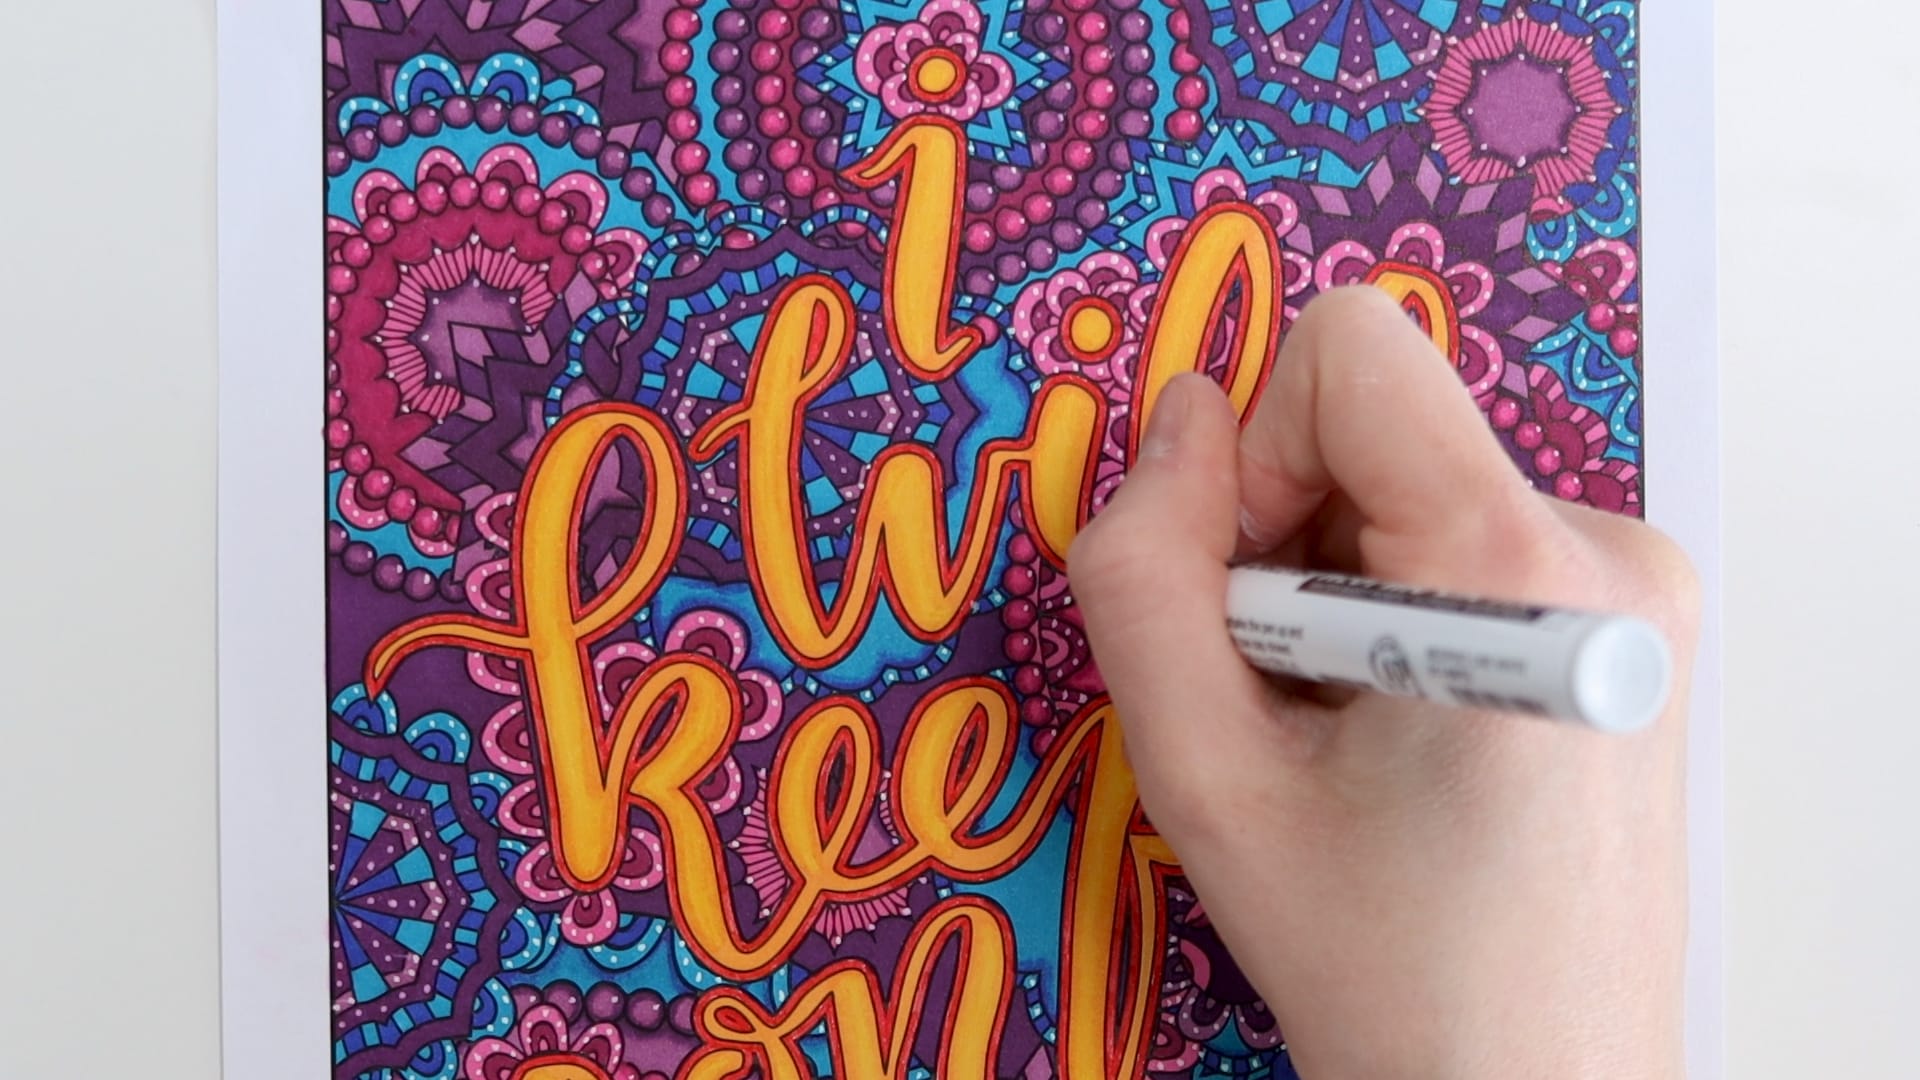 How to Use a White Gel Pen: 10 Tips For Beginner Artists 